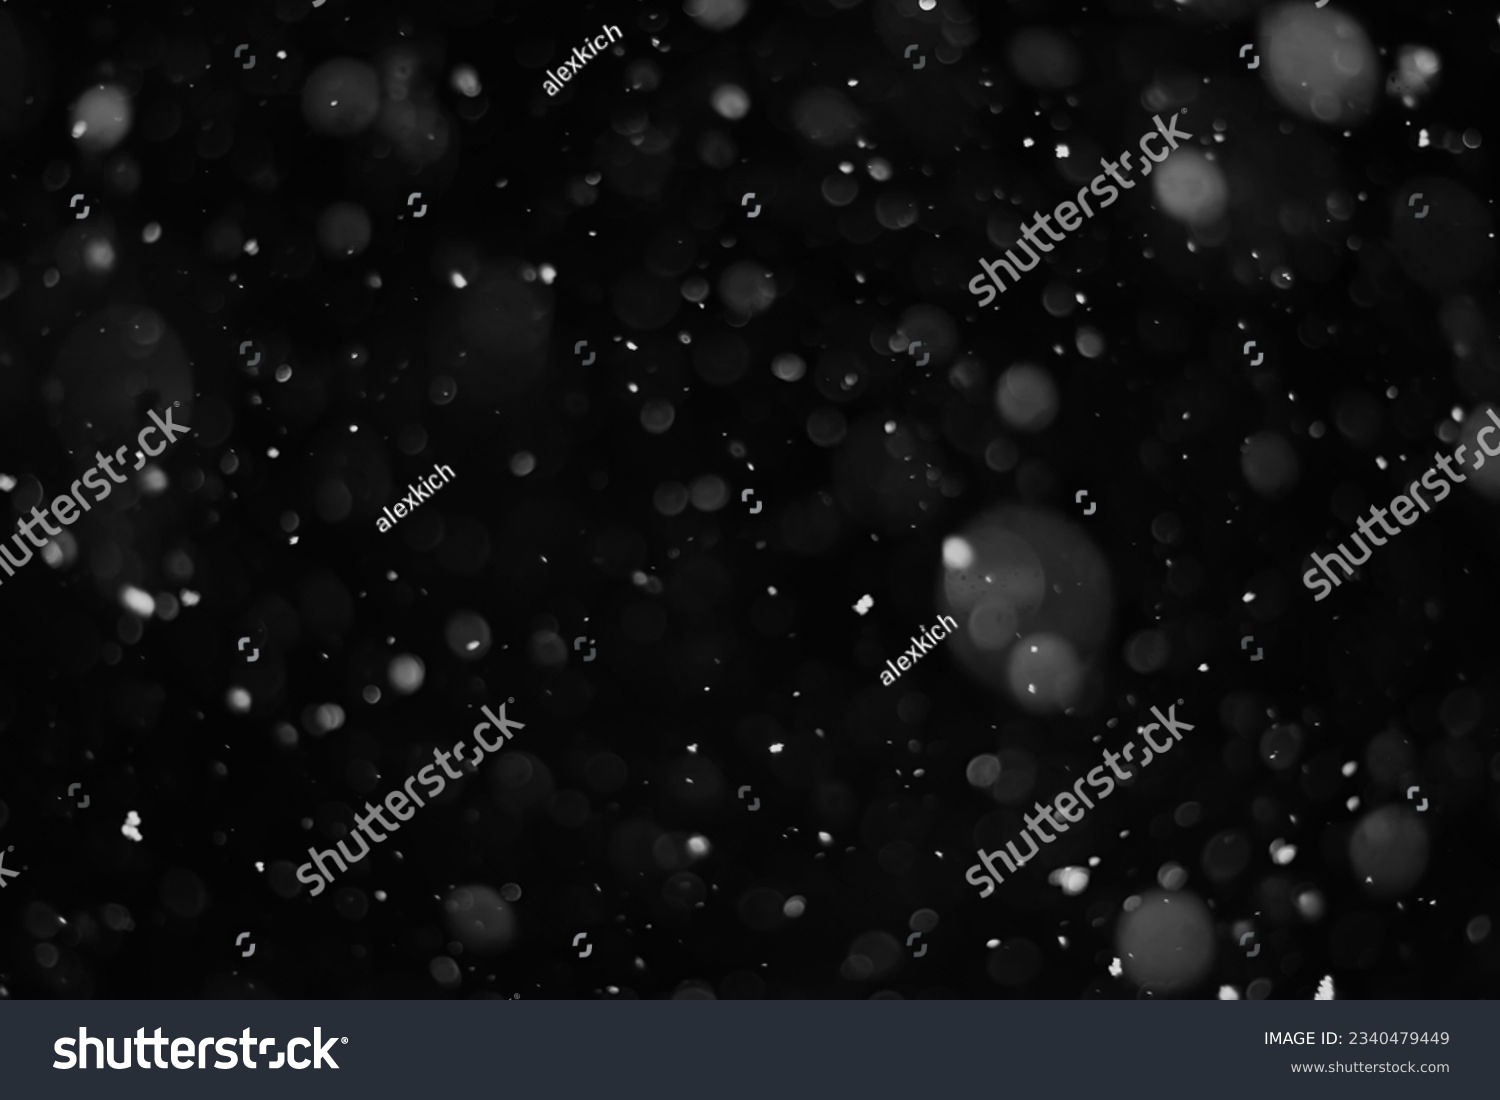 Snow on a black background. Snowflakes overlay. Snow background. #2340479449